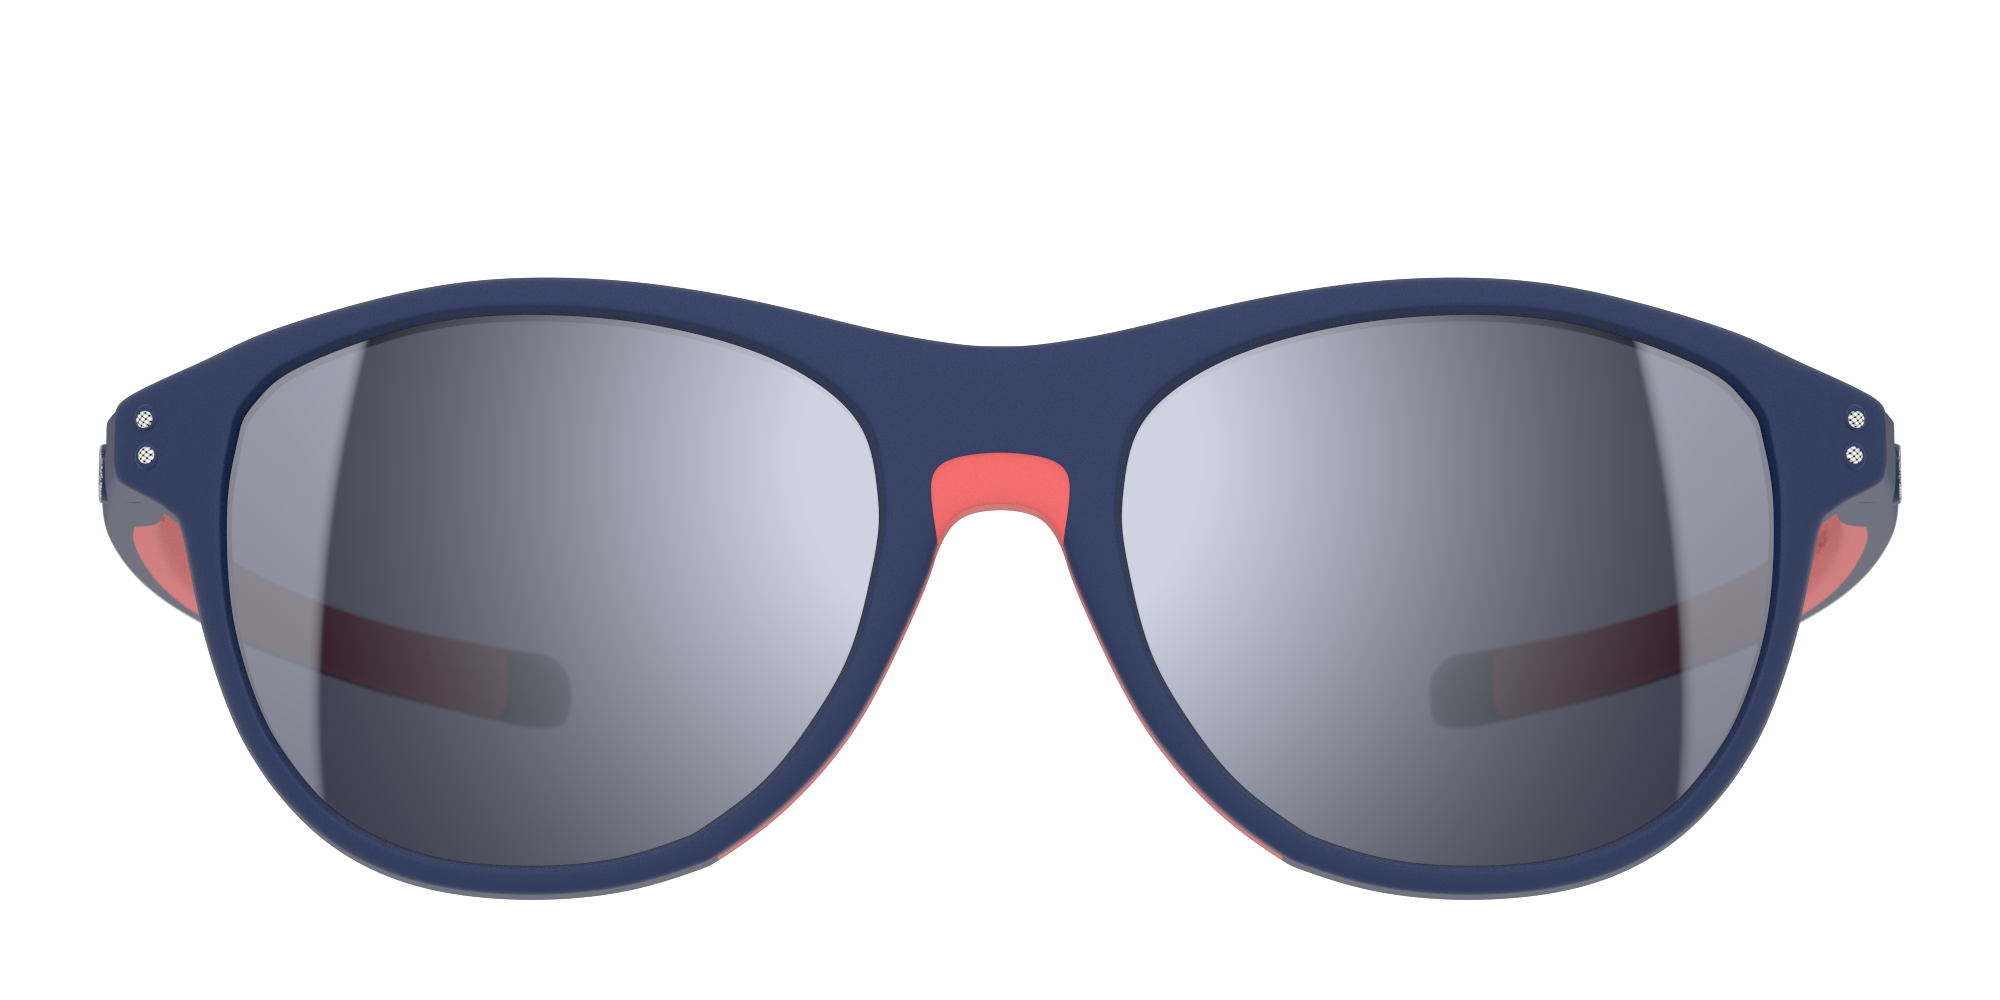 [products.image.front] JULBO J538-NOLLIE 1138